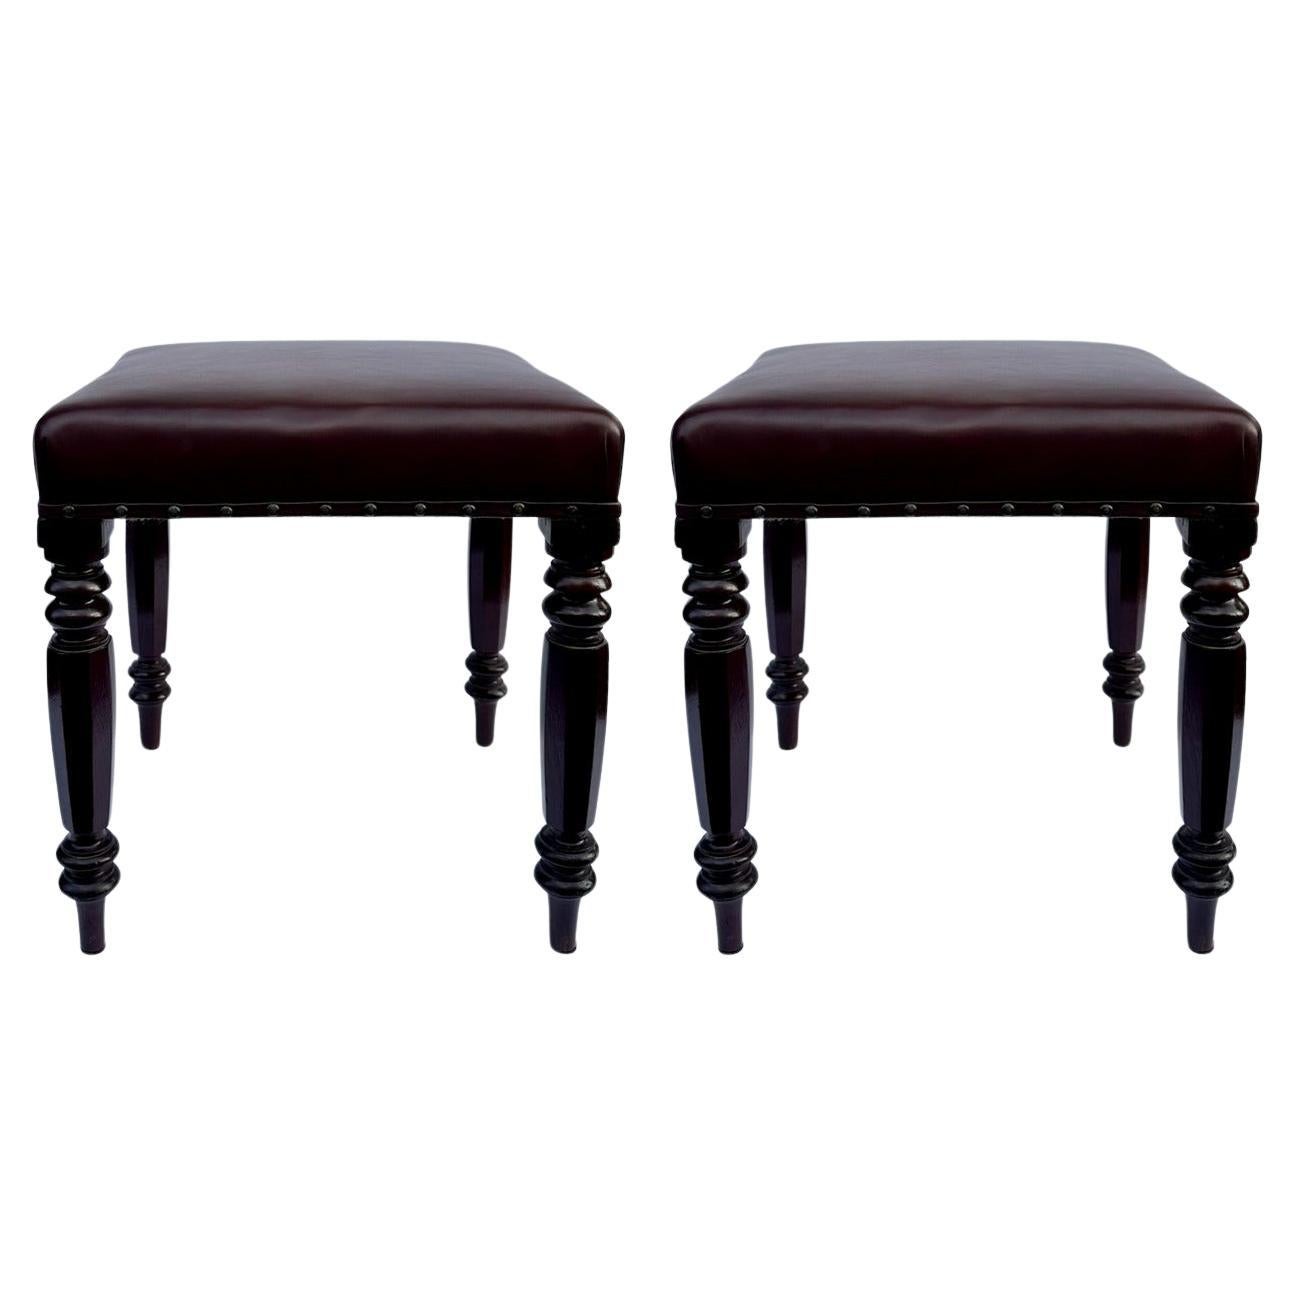 Pair Antique English Victorian Carved Mahogany Leather Upholstered Stools 19 Ct. For Sale